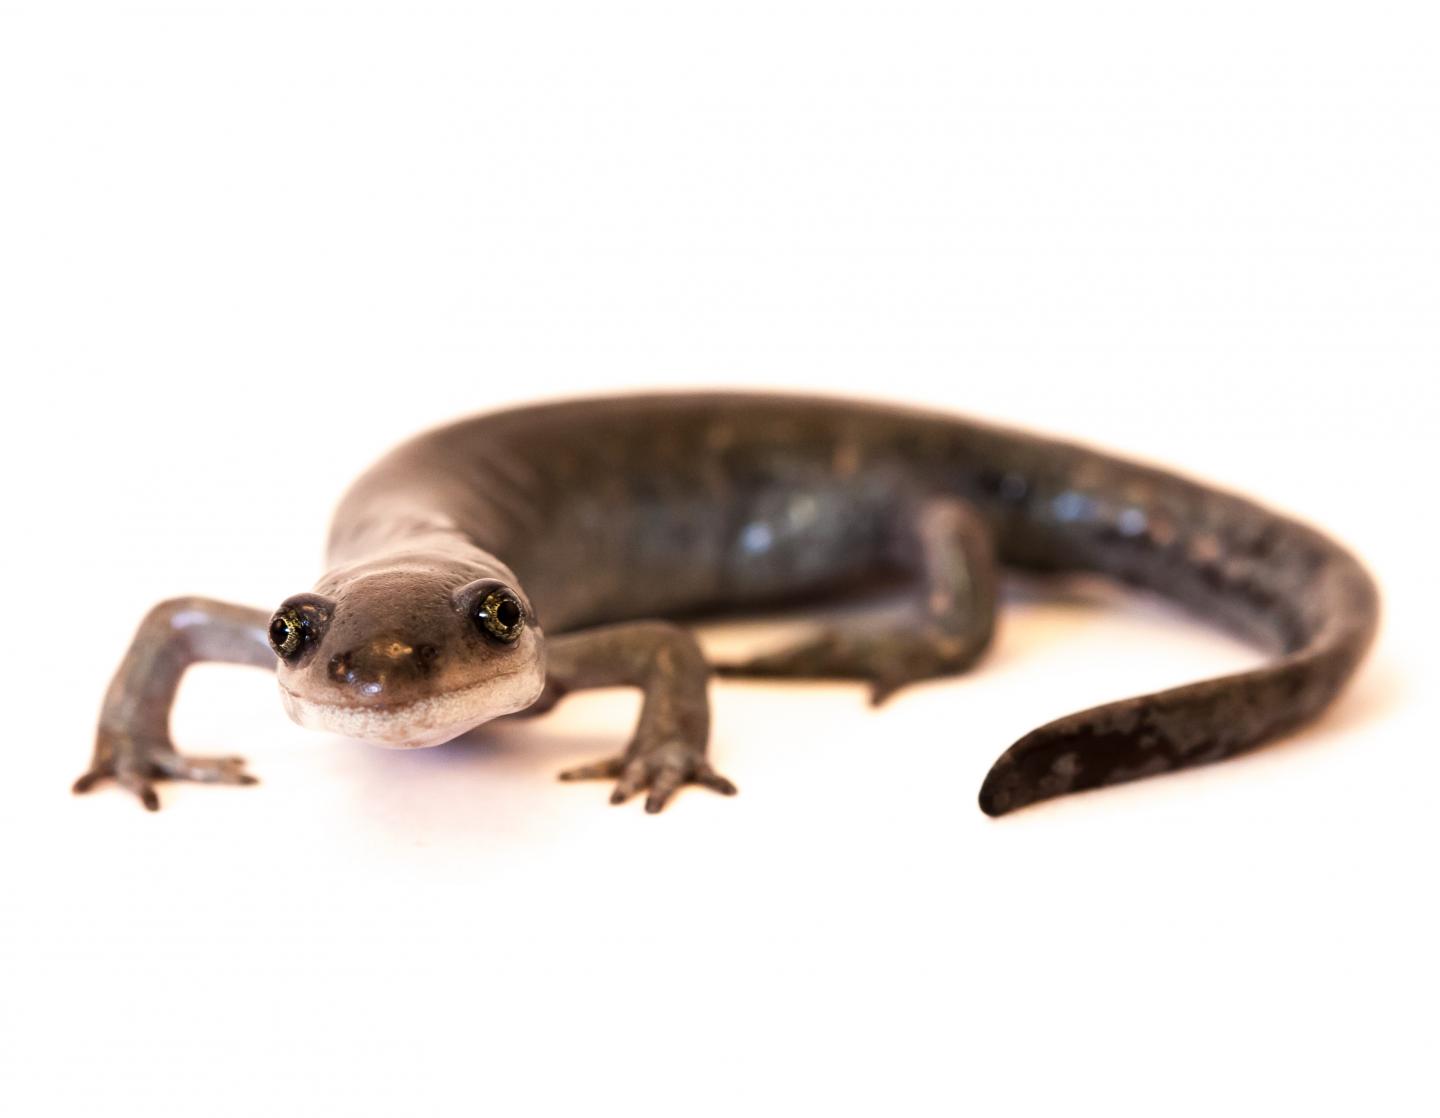 One Promiscuous Salamander